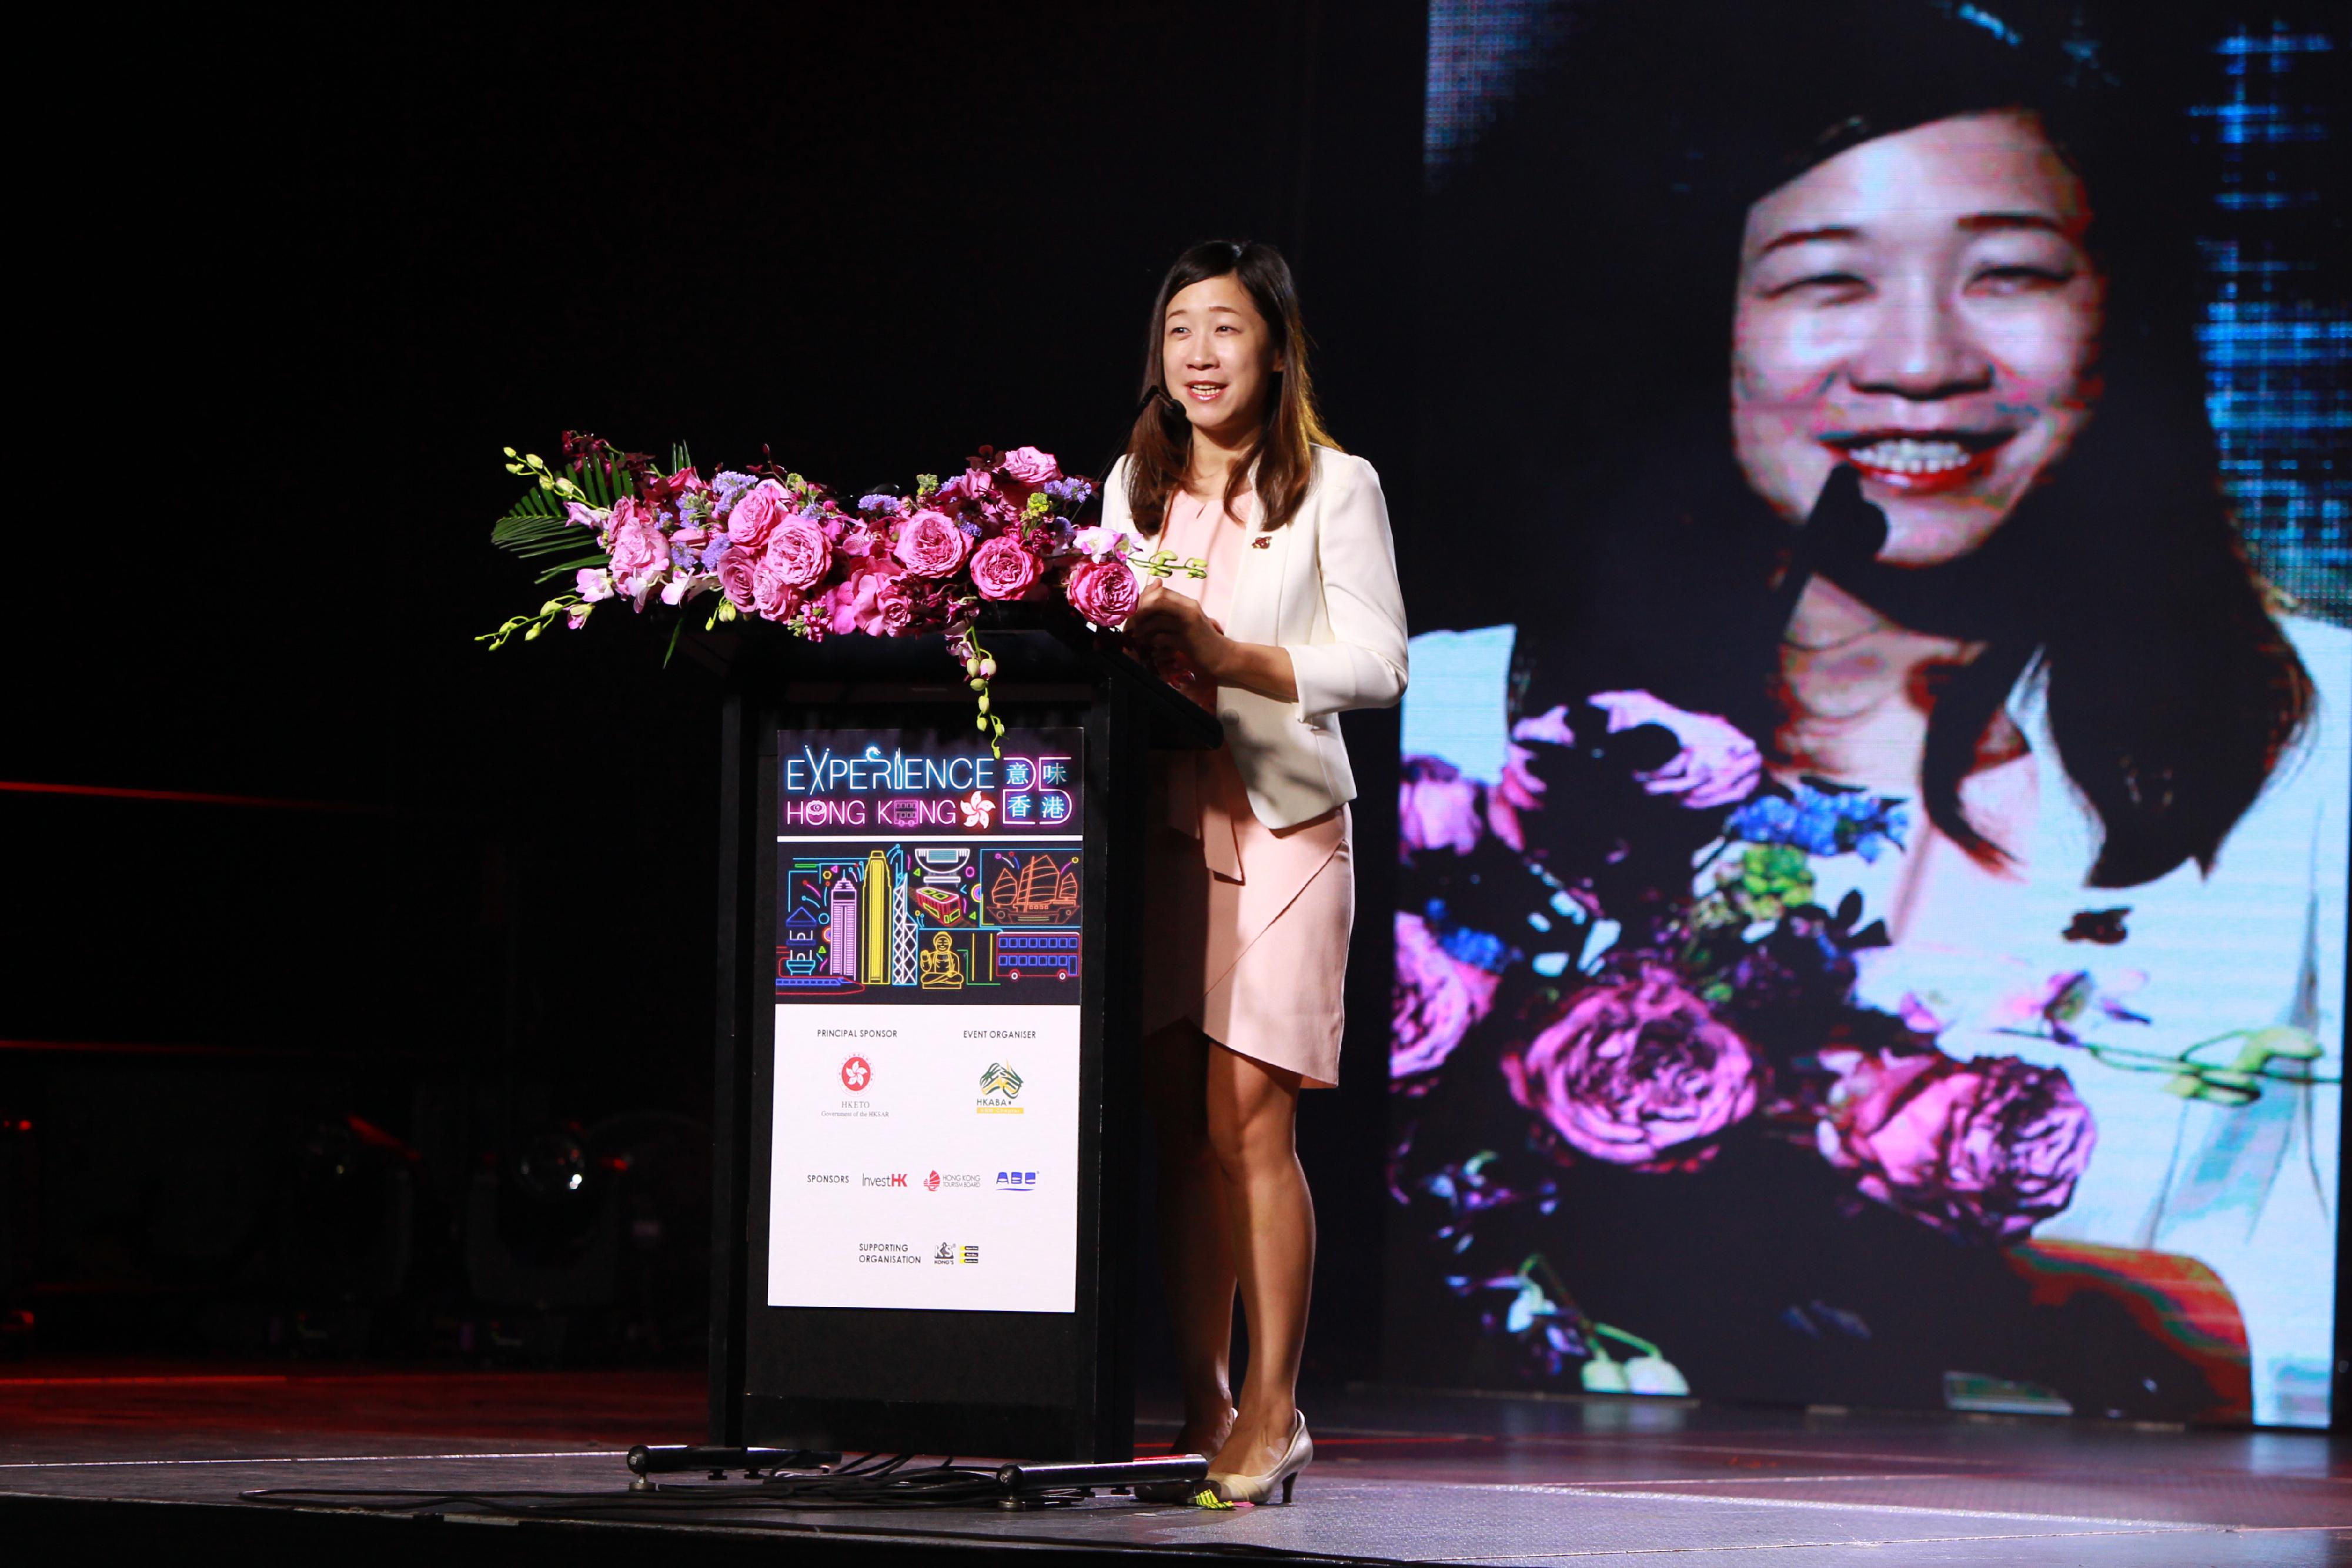 Experience Hong Kong was held in Sydney, Australia, today (August 27) for members of the public to share the joy of the 25th anniversary of the establishment of the Hong Kong Special Administrative Region. Photo shows the Director of the Hong Kong Economic and Trade Office, Sydney, Miss Trista Lim, delivering a welcoming speech.